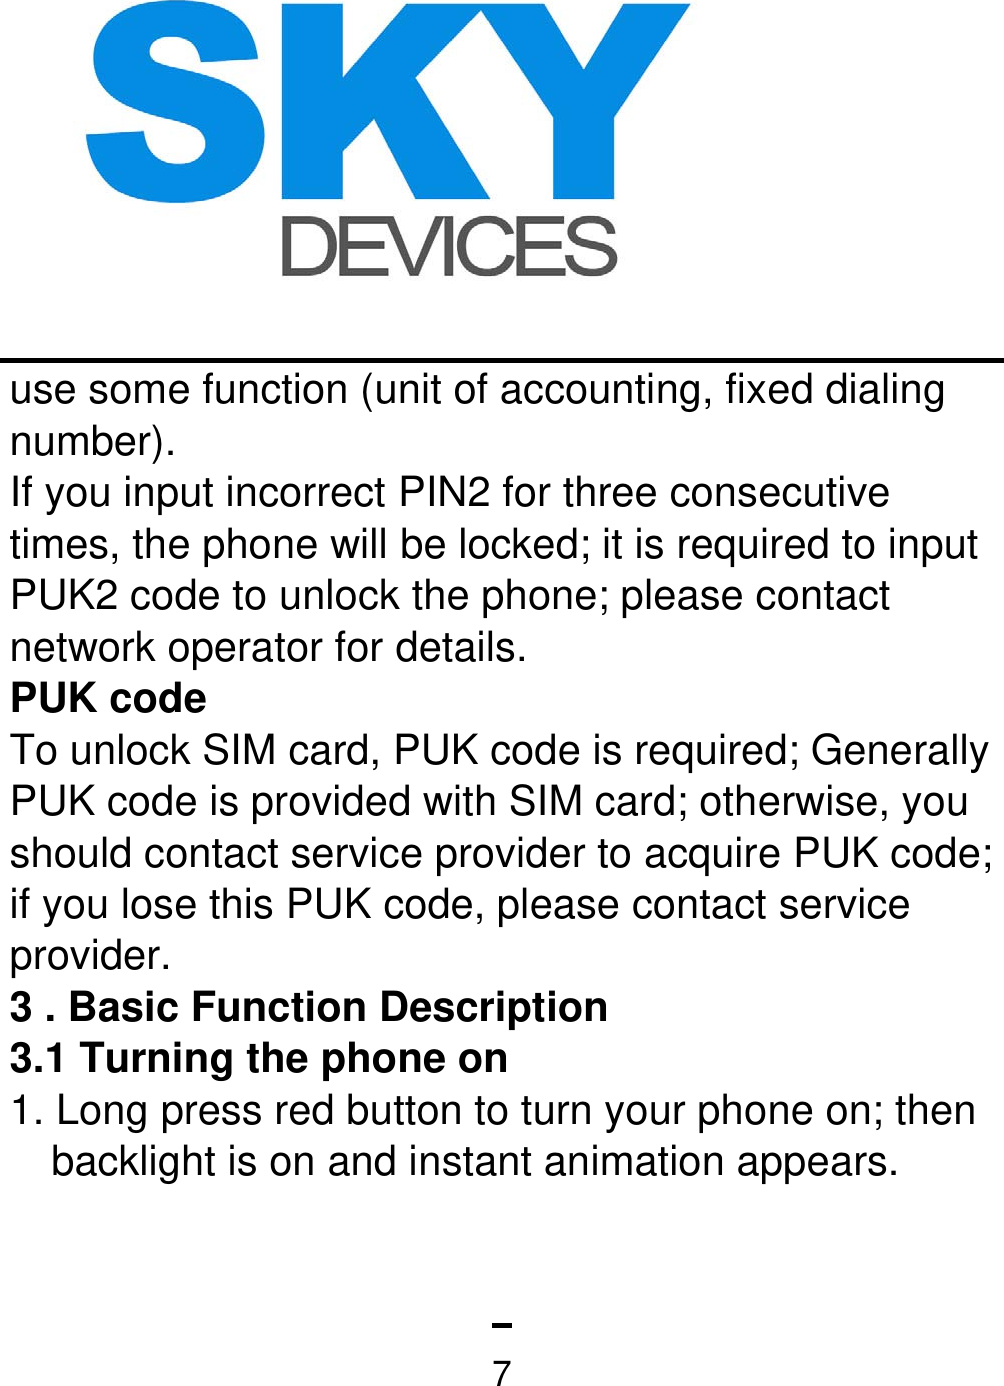   7use some function (unit of accounting, fixed dialing number). If you input incorrect PIN2 for three consecutive times, the phone will be locked; it is required to input PUK2 code to unlock the phone; please contact network operator for details. PUK code To unlock SIM card, PUK code is required; Generally PUK code is provided with SIM card; otherwise, you should contact service provider to acquire PUK code; if you lose this PUK code, please contact service provider. 3 . Basic Function Description   3.1 Turning the phone on   1. Long press red button to turn your phone on; then backlight is on and instant animation appears.   